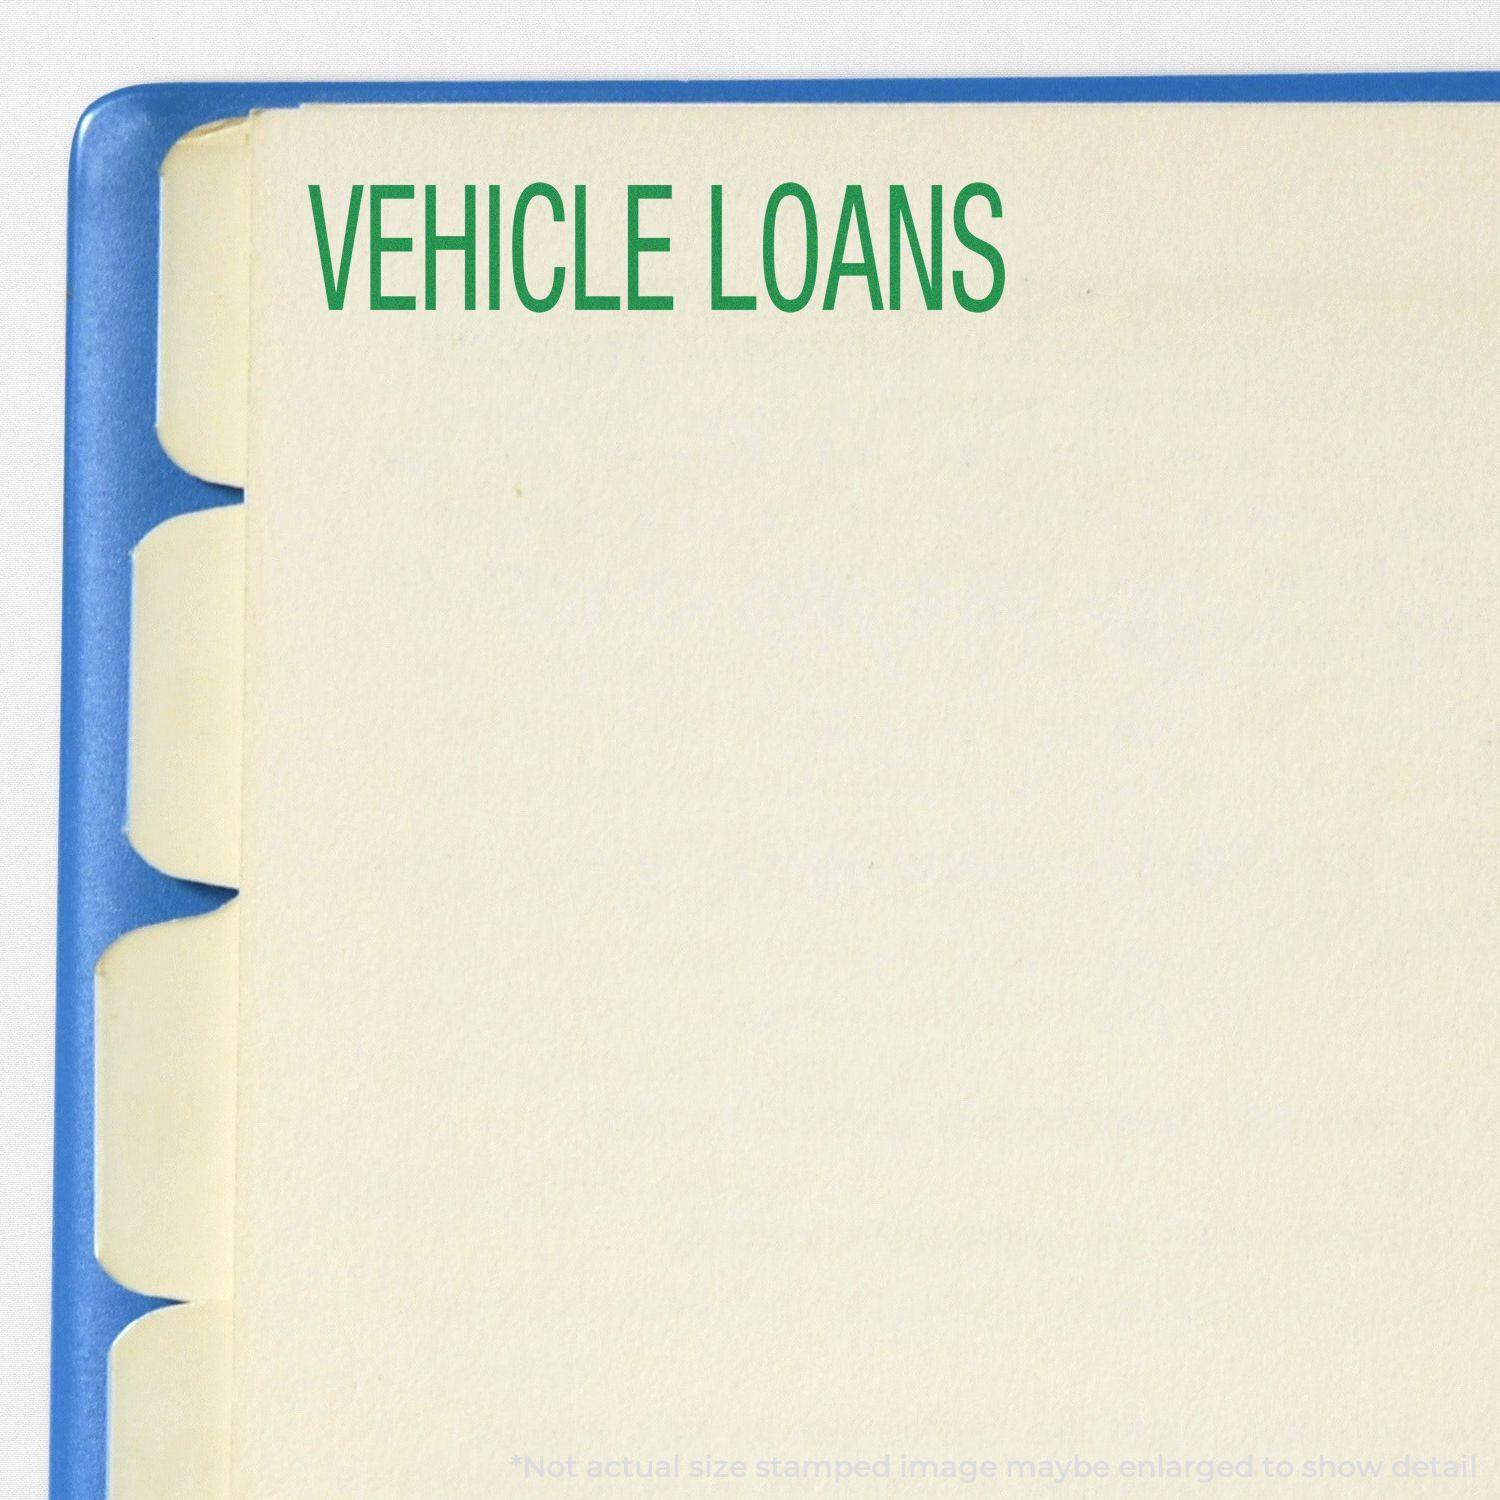 A stock office rubber stamp with a stamped image showing how the text "VEHICLE LOANS" in a large font is displayed after stamping.